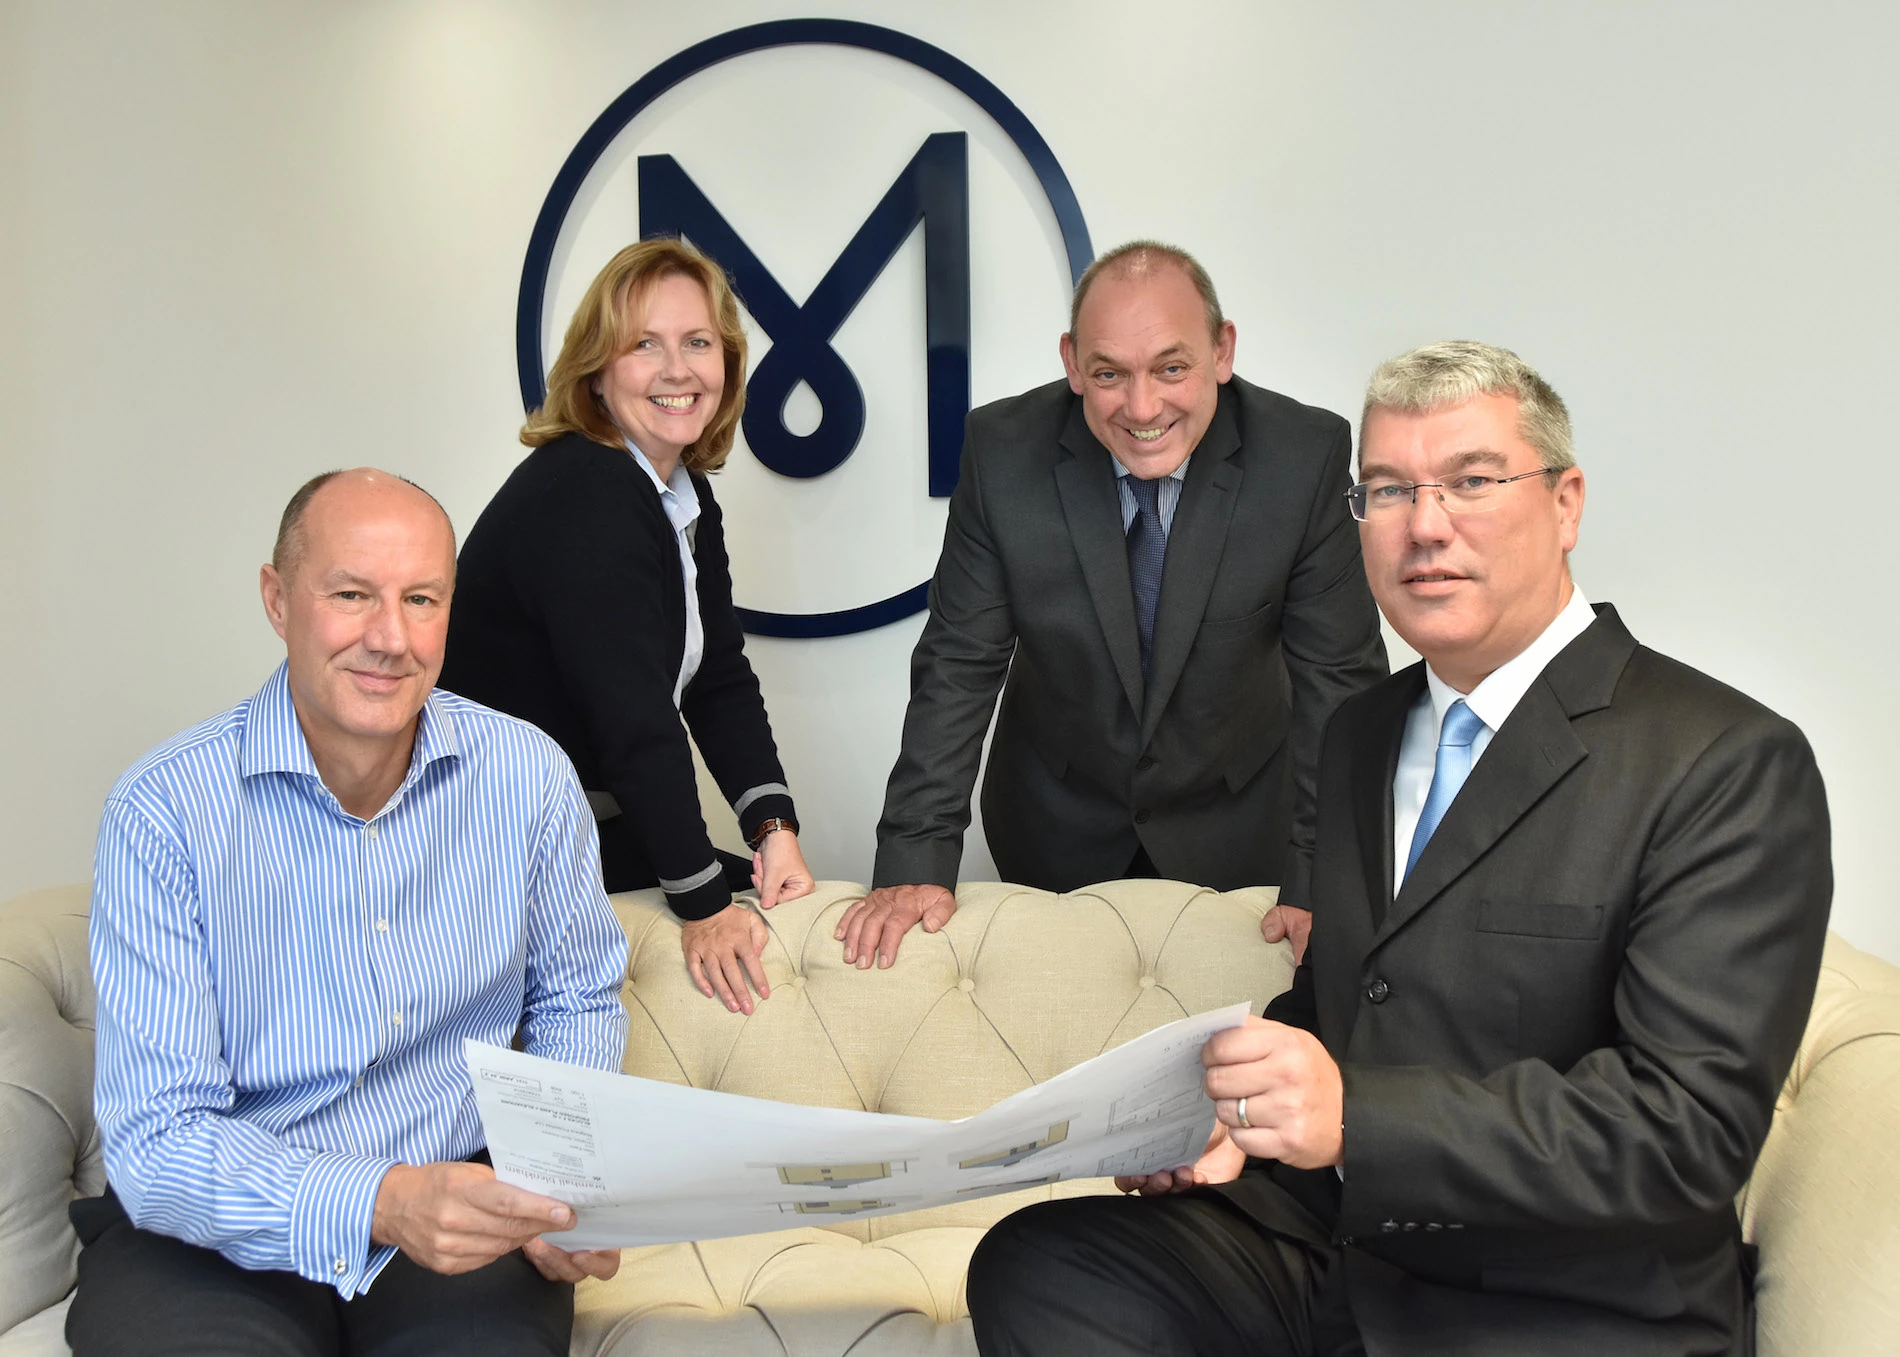 From left to right: Ian Hessay, Managing Director, Melanie Powls, Field Sales Manager, Kevin Hoyland, Construction Director and Rob Martin, Technical Co-ordinator.